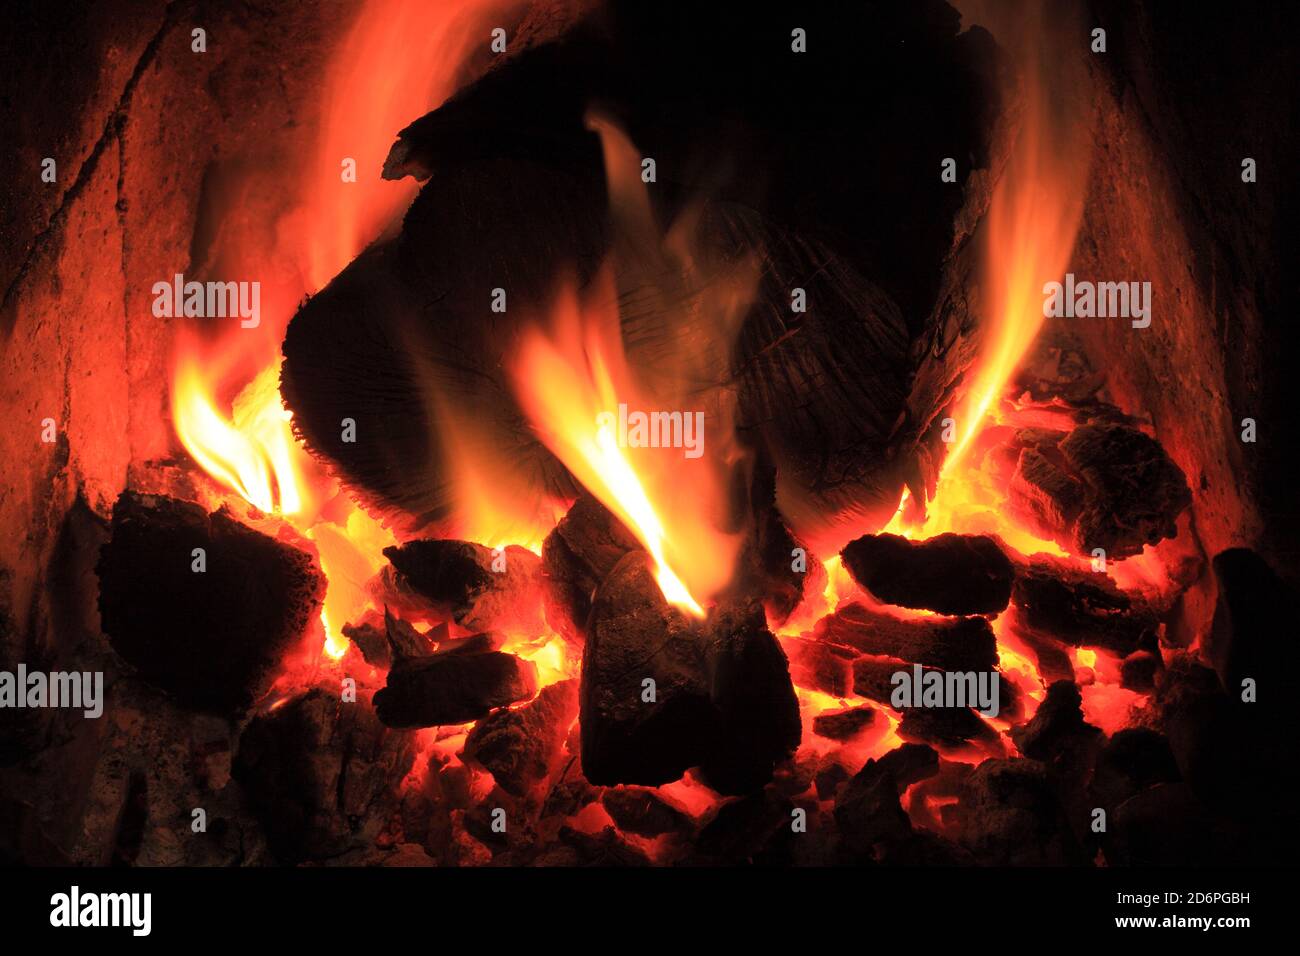 Coal and wood, log, fire, domestic, hearth, burning, heat, grate,warmth Stock Photo